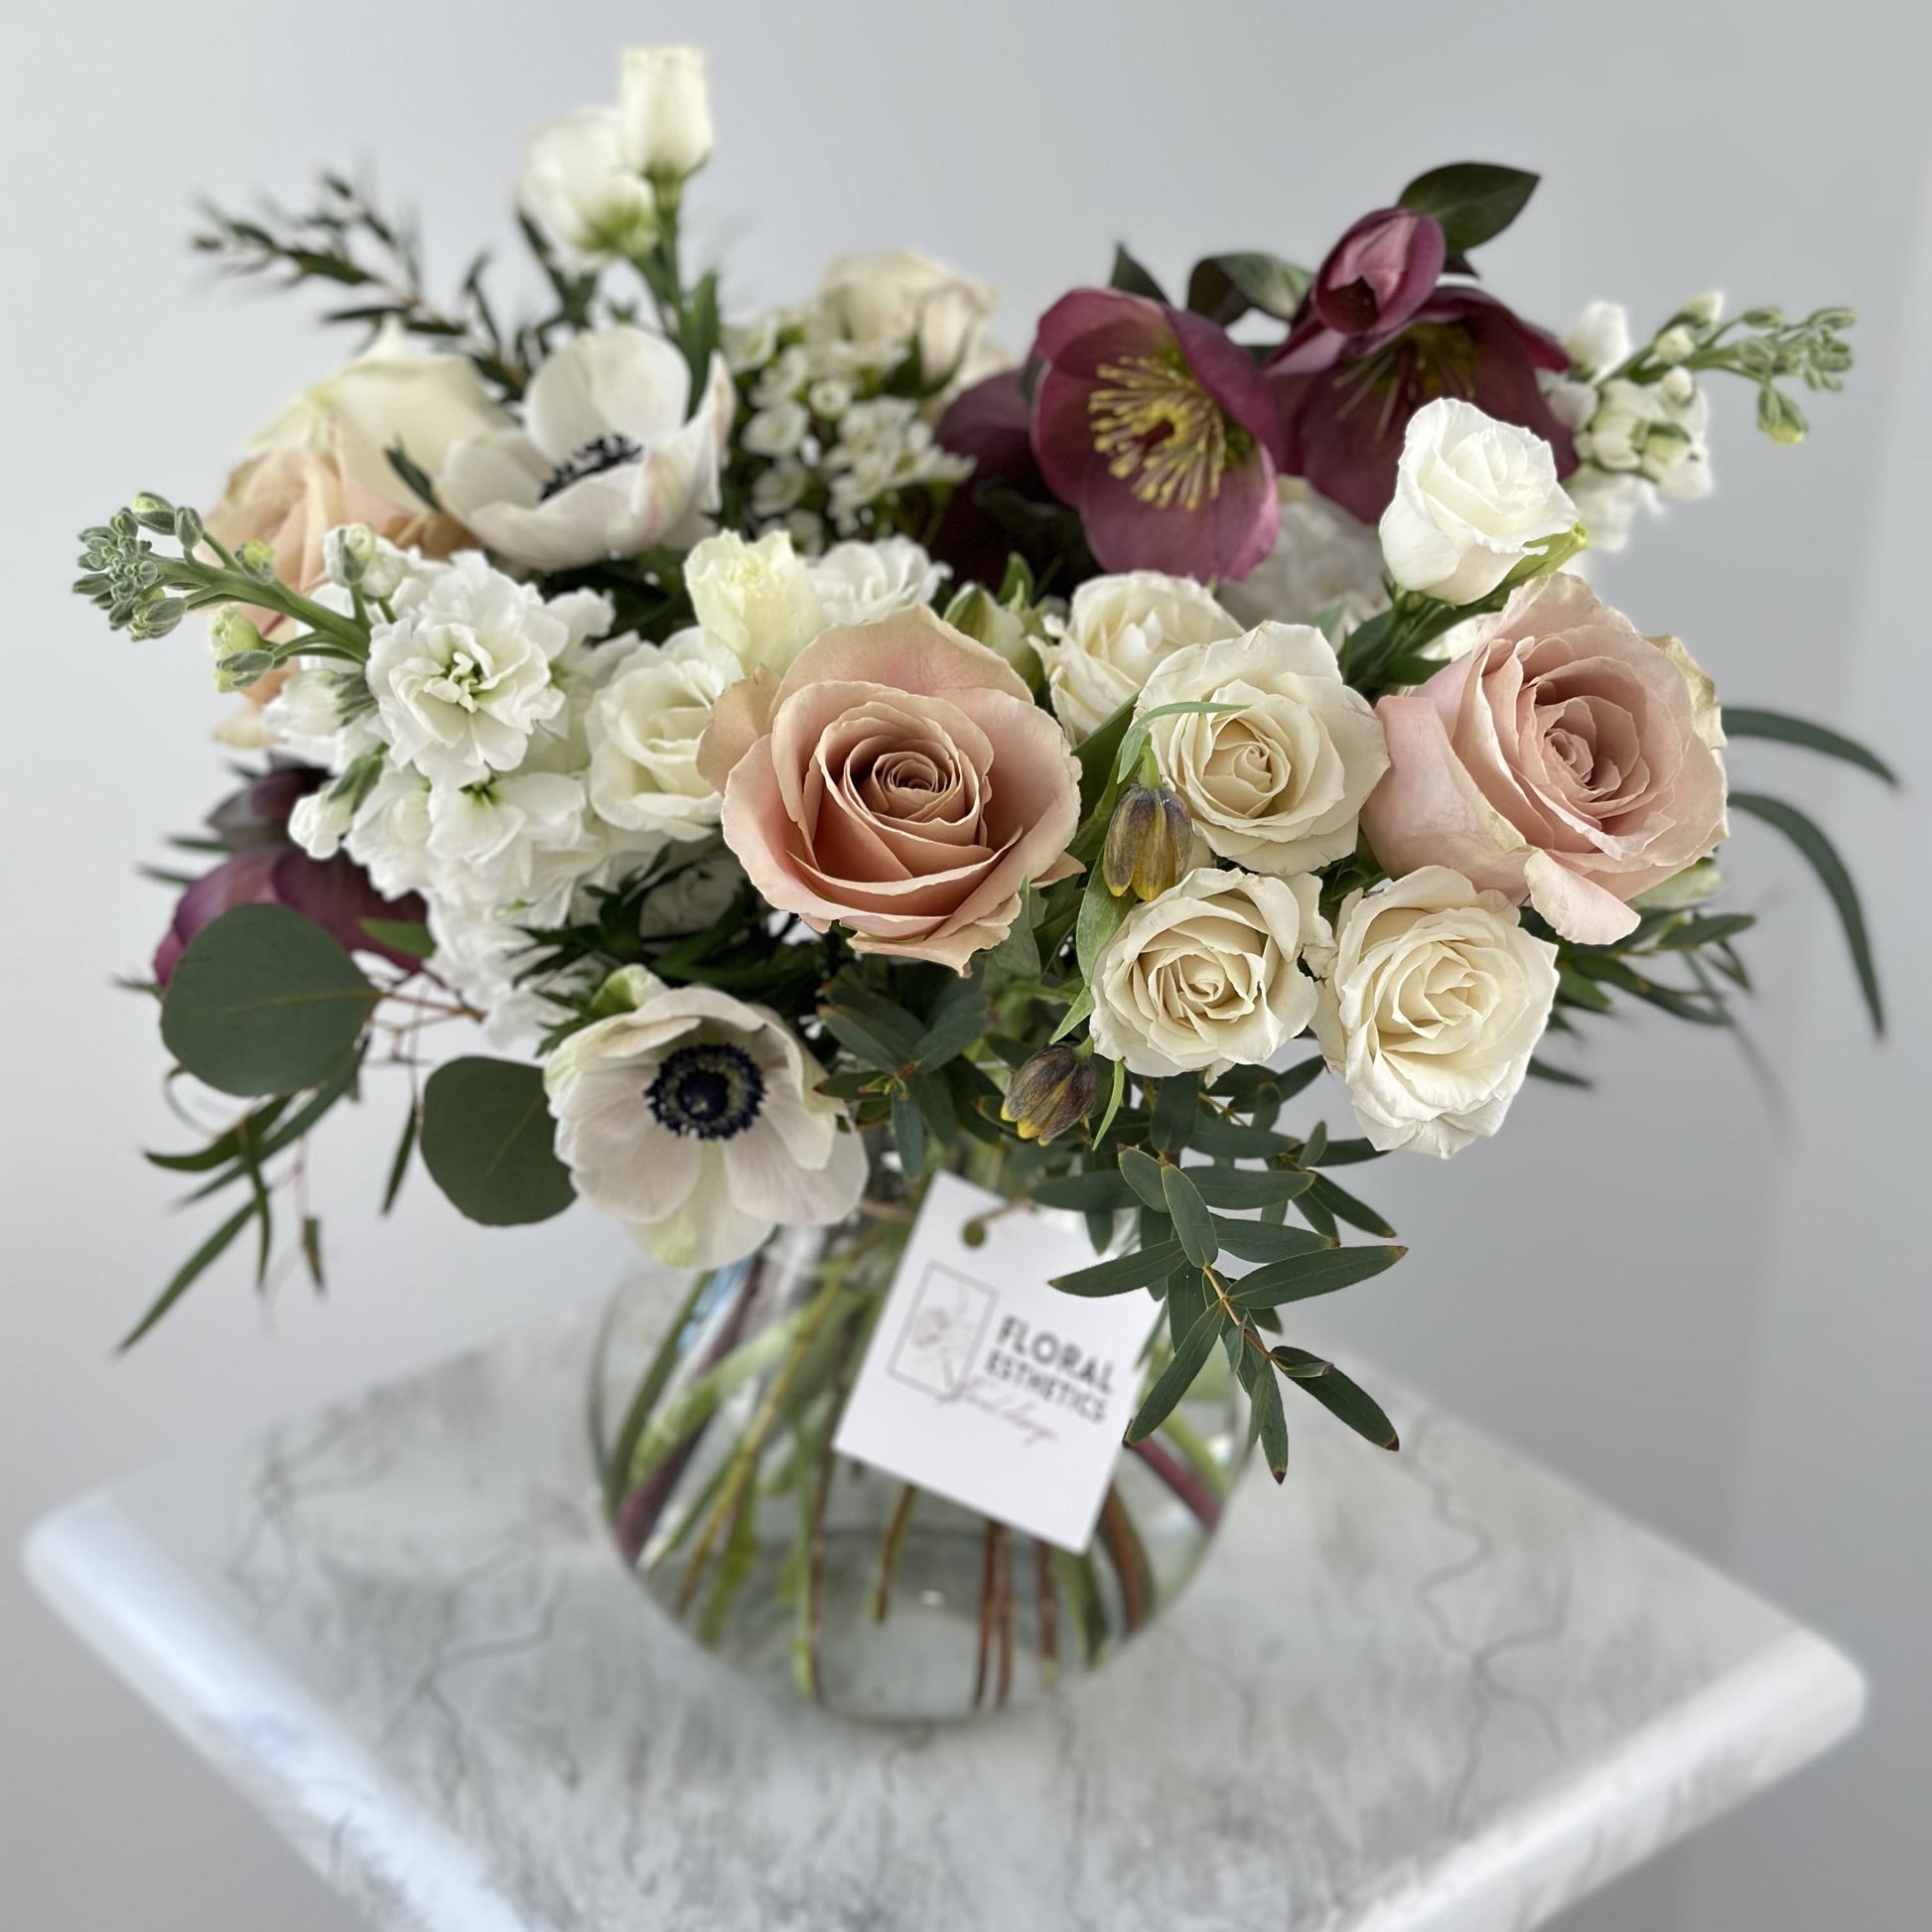 White and coffee color arrangement in clear vase featuring anemone, roses, spray roses, lizianthus, hellebore, eucalyptus, wax flower and more